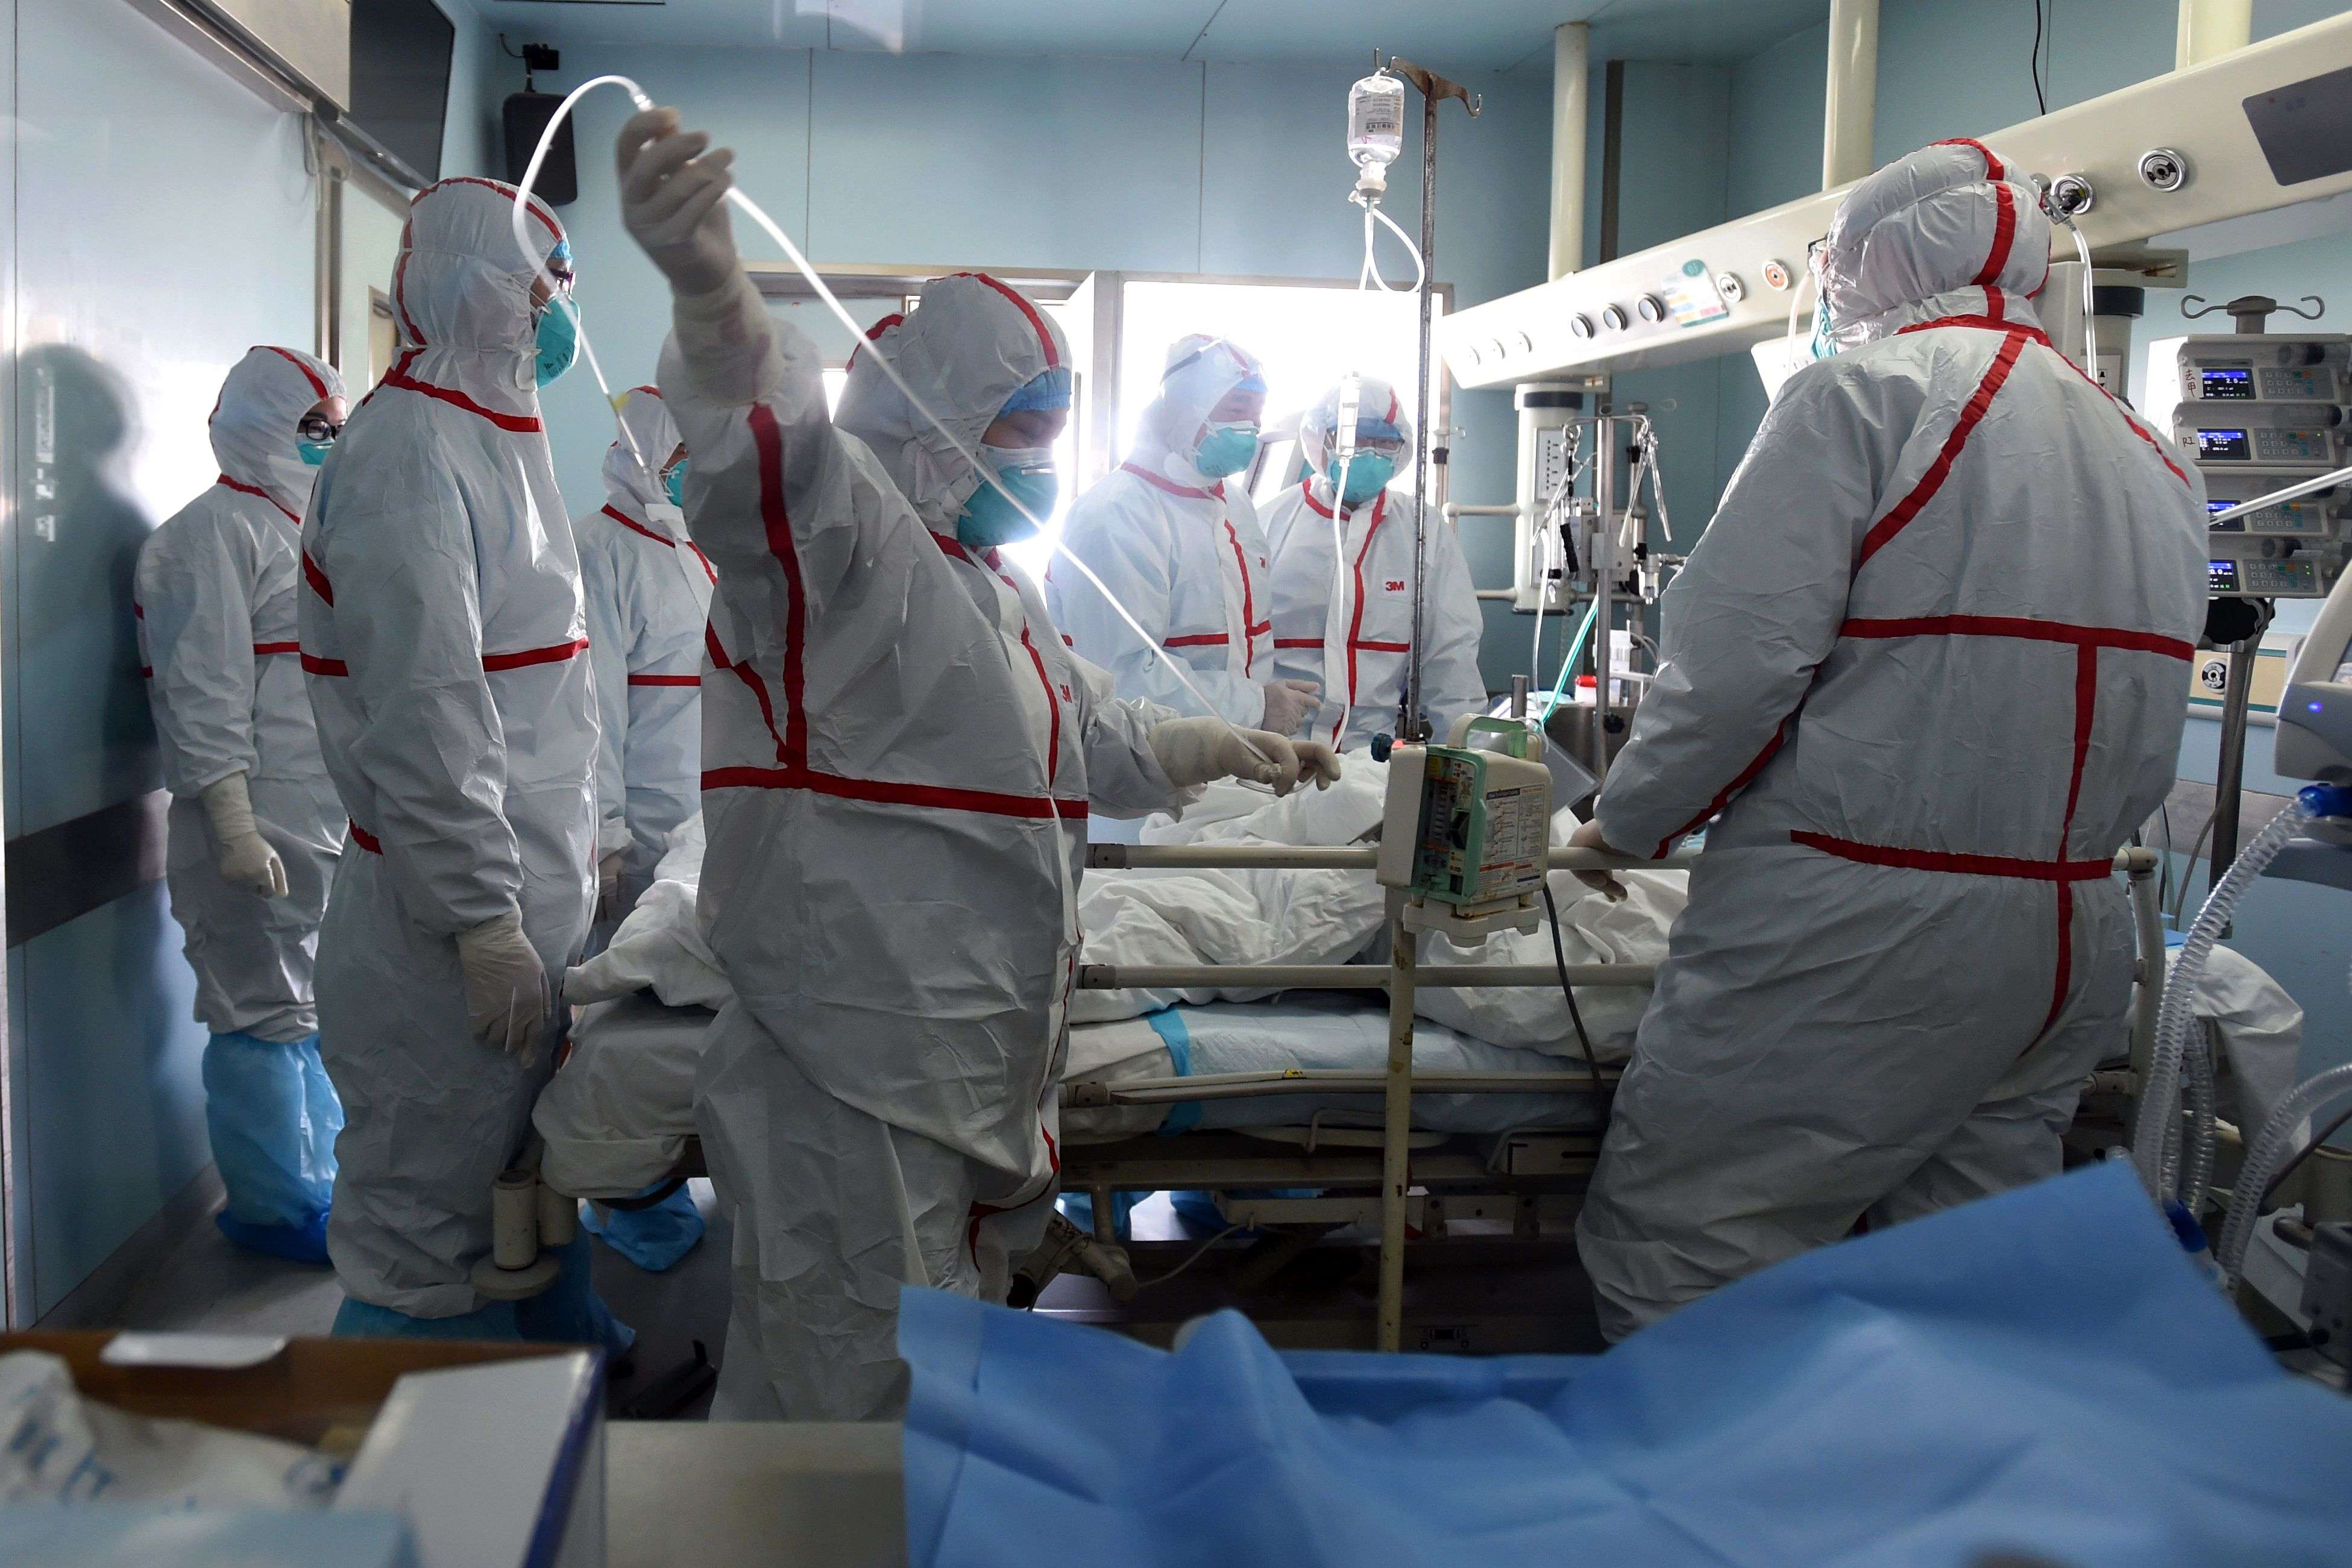 A patient with H7N9 bird flu is treated in a hospital in Wuhan, Hubei province, on February 12. Photo: AFP